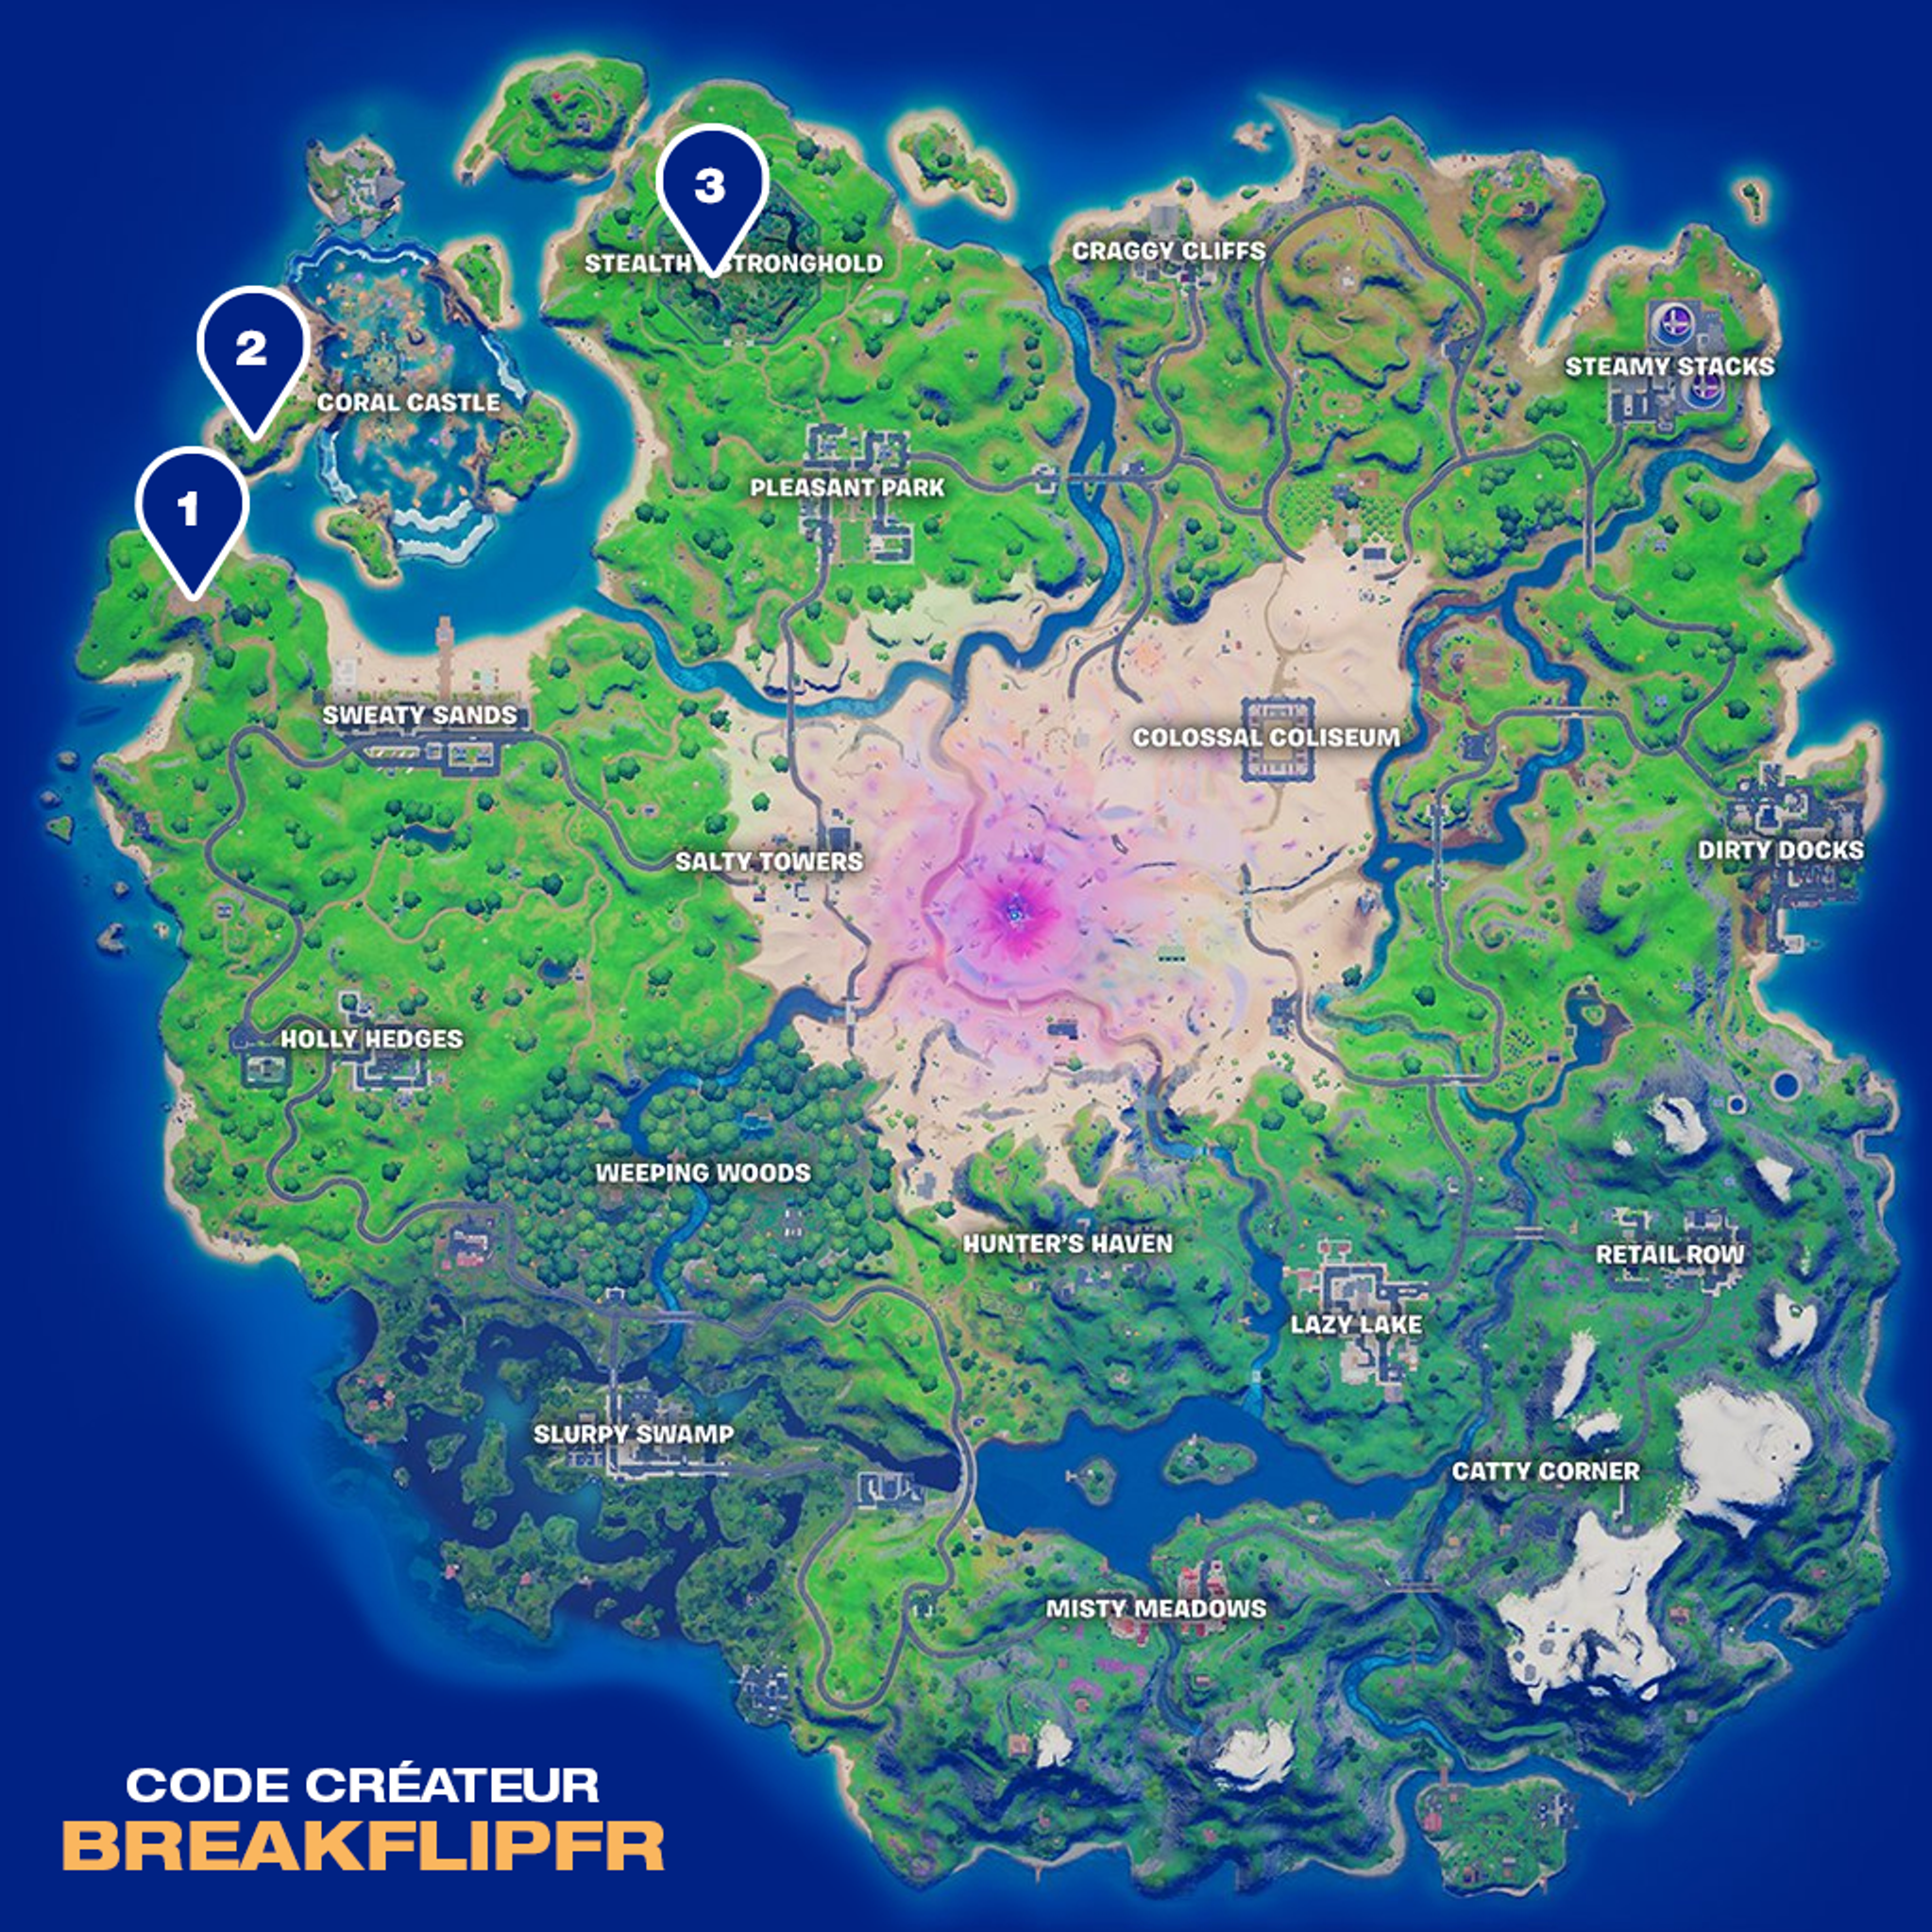 fortnite-potion-amour-fort-lacrepe-crique-corallienne-stealthy-stronghold